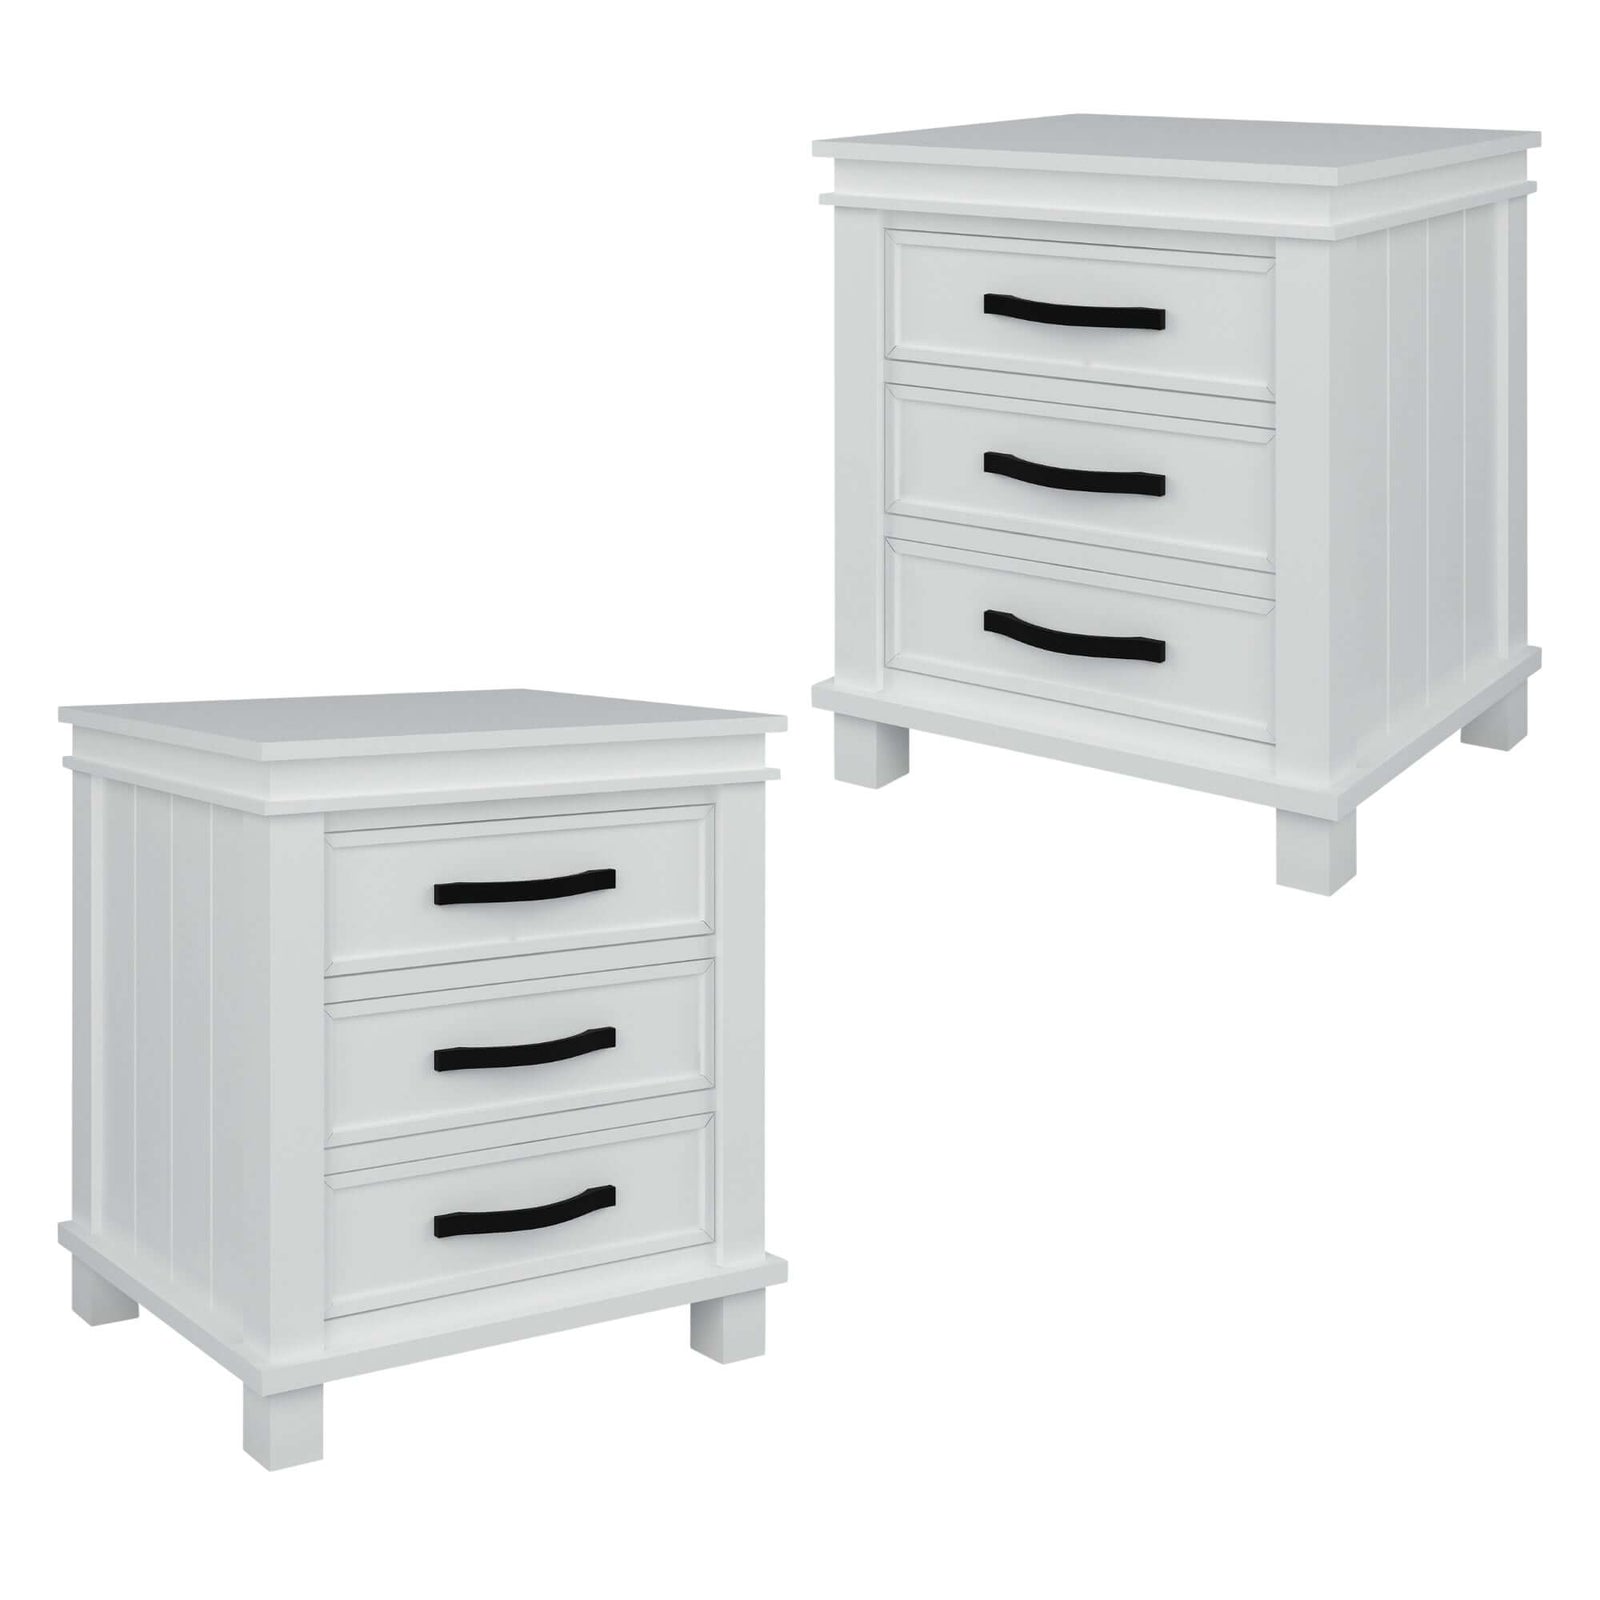 Lily Set of 2 Bedside Tables 3 Drawers Storage Cabinet Nightstand - White-Upinteriors